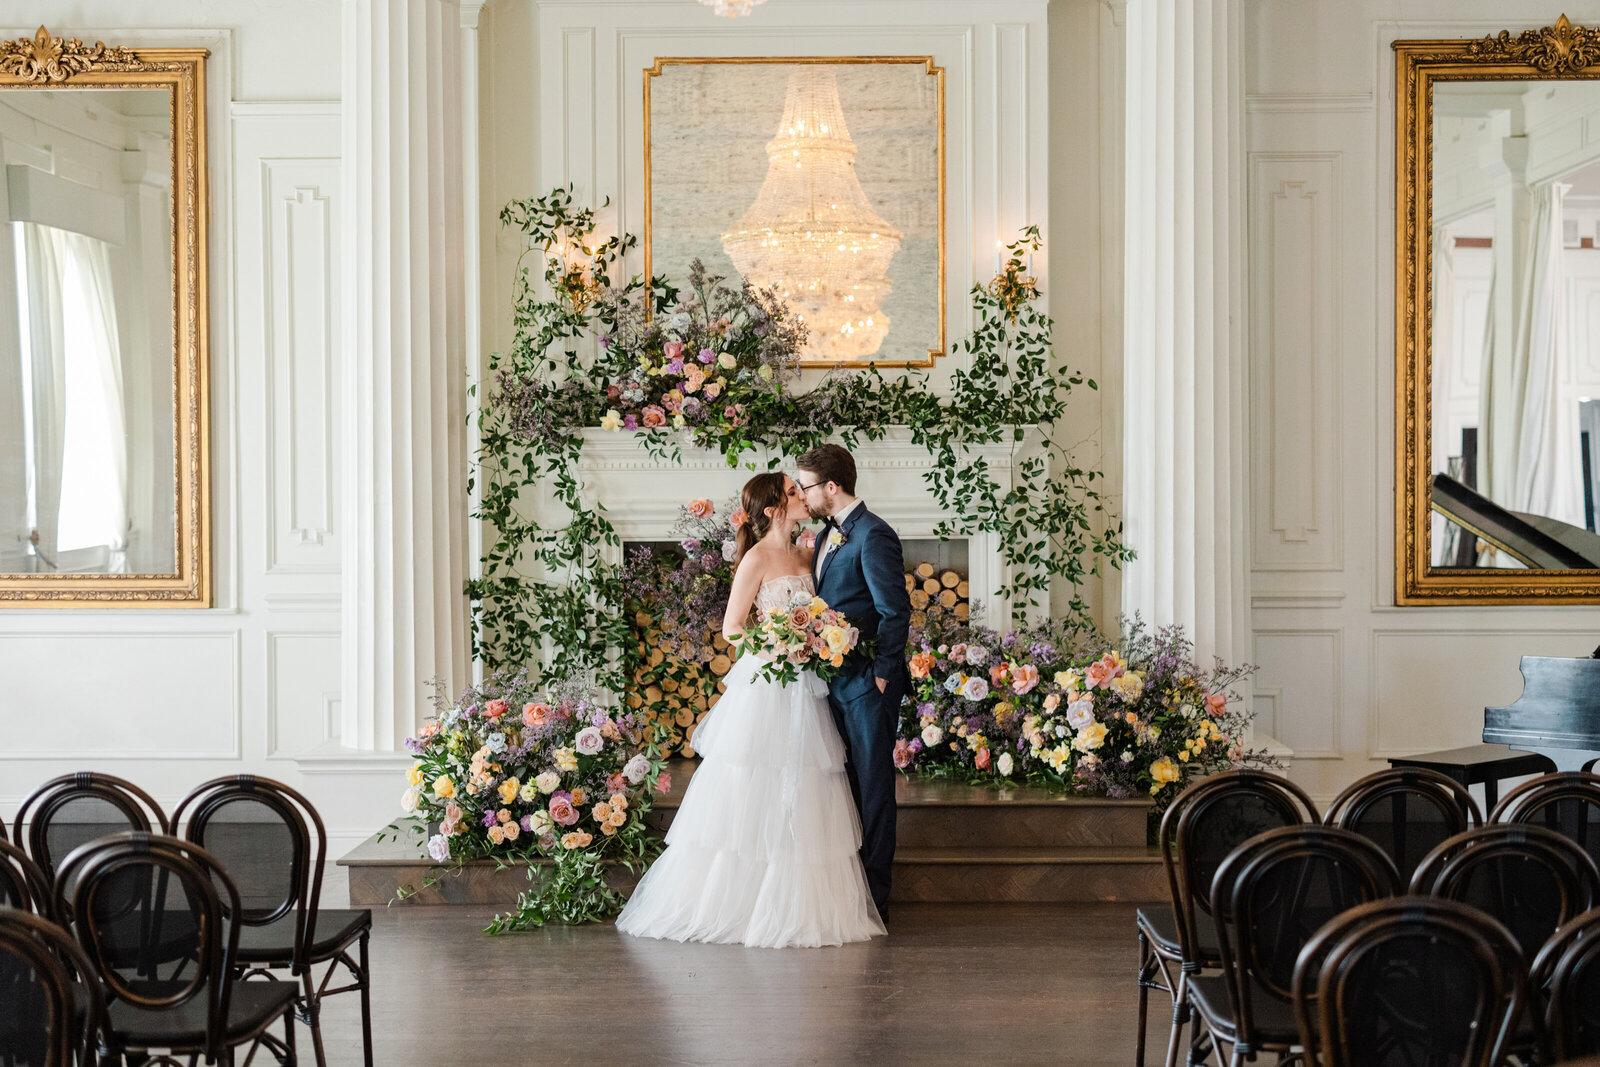 A newlywed couple stands in front of a fireplace at The Mason Wedding Venue in Dallas, TX. They are surrounded by greenery and bold pink, orange, purple, and yellow spring florals. The bride is on the left and is wearing a ruffled tiered wedding skirt and a sheer lace strapless top. She has brown hair and it's in a party ponytail. She's kissing her groom. The groom is wearing a navy blue suit.